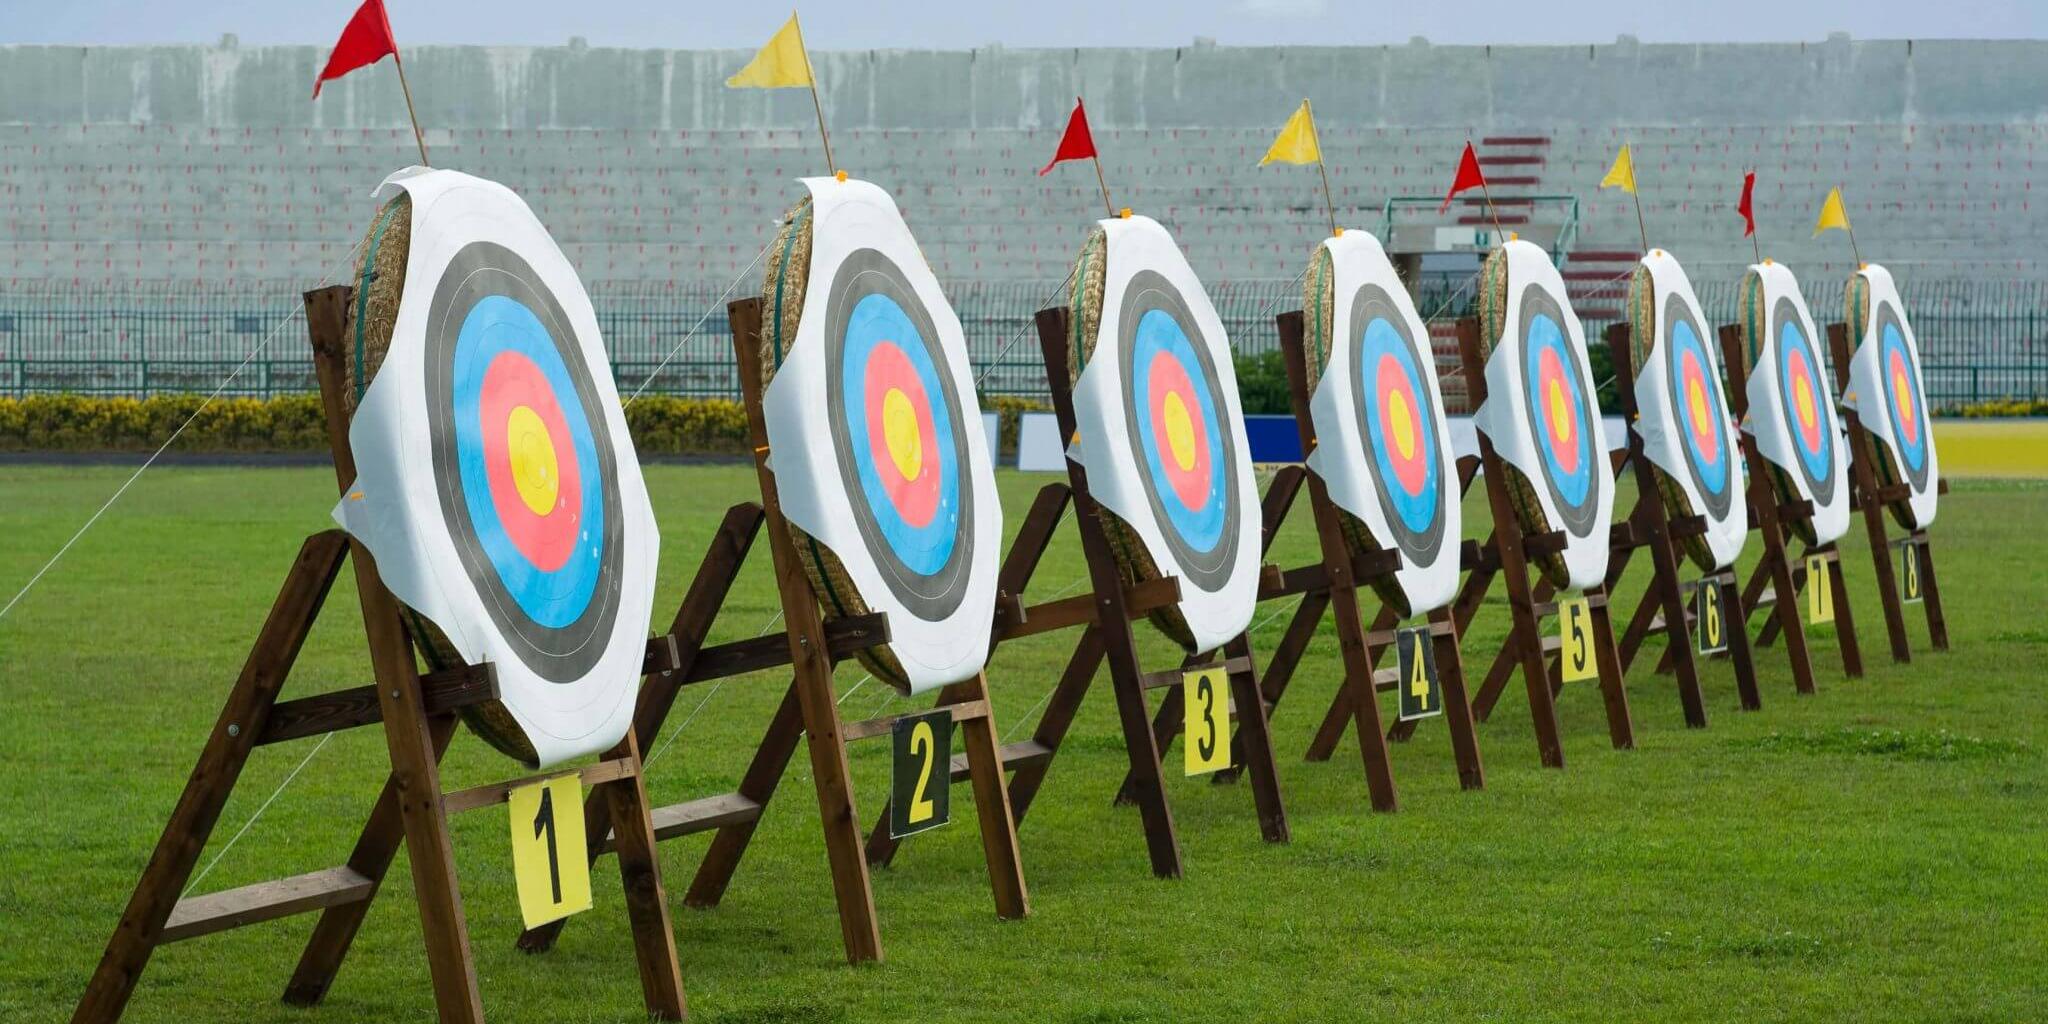 Archery targets on grass from team building event